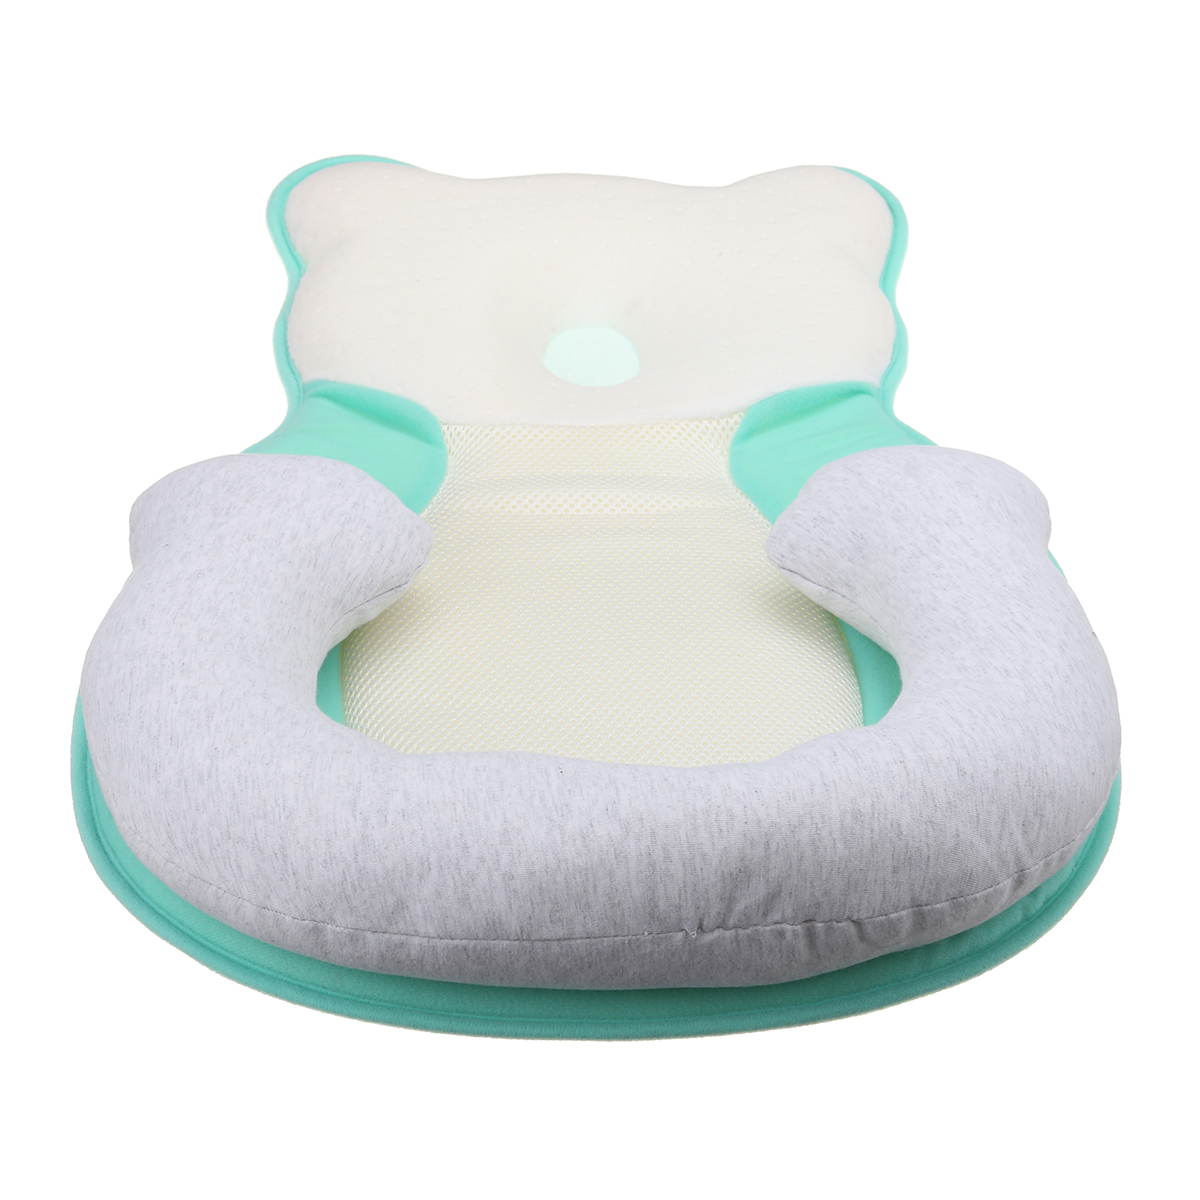 Breathable Newborn Baby Infant Pillow Sleep Mat Anti Flat Head For Crib Bed Neck-Suppor